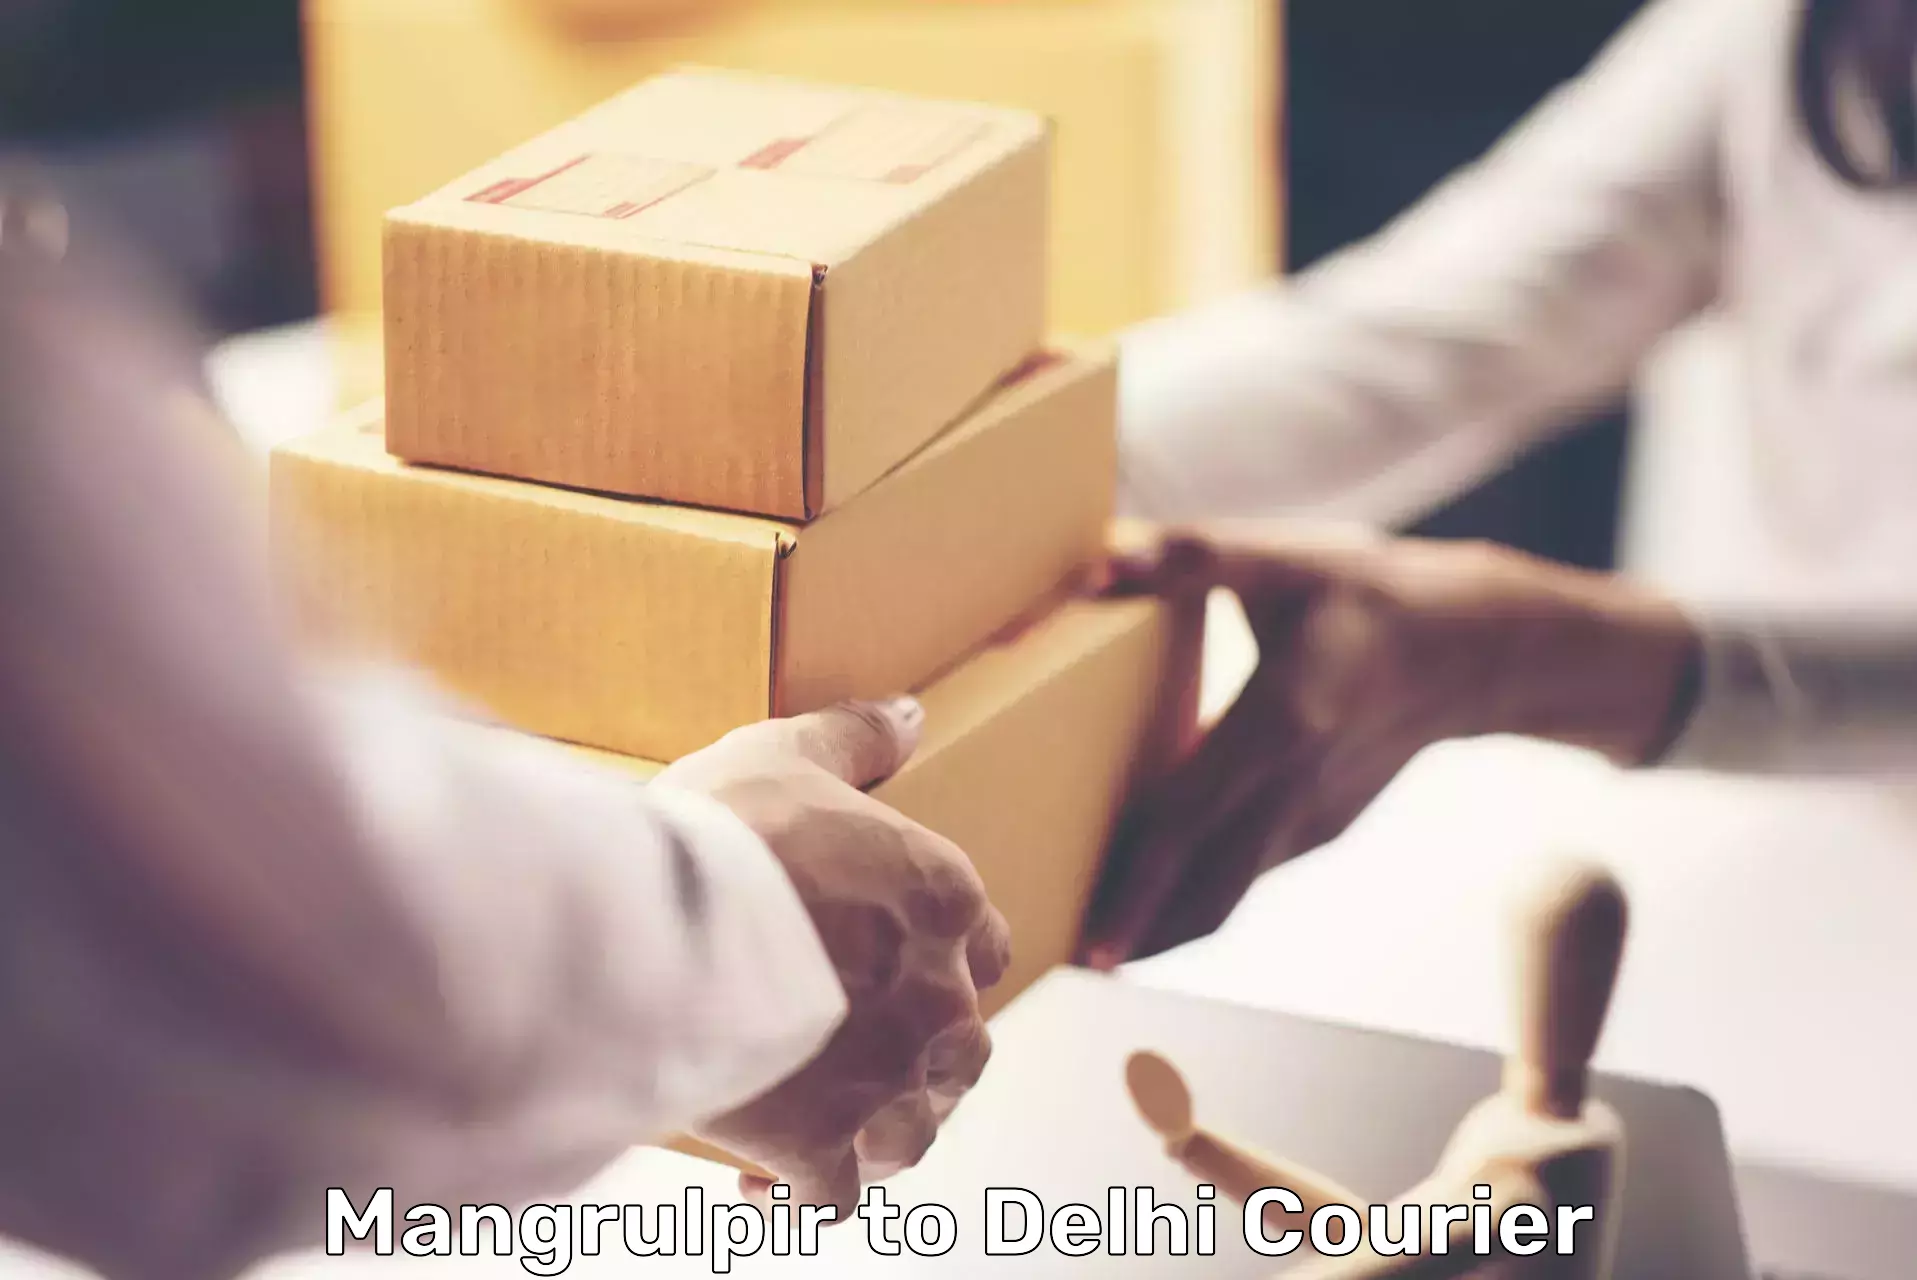 Personal parcel delivery in Mangrulpir to NCR